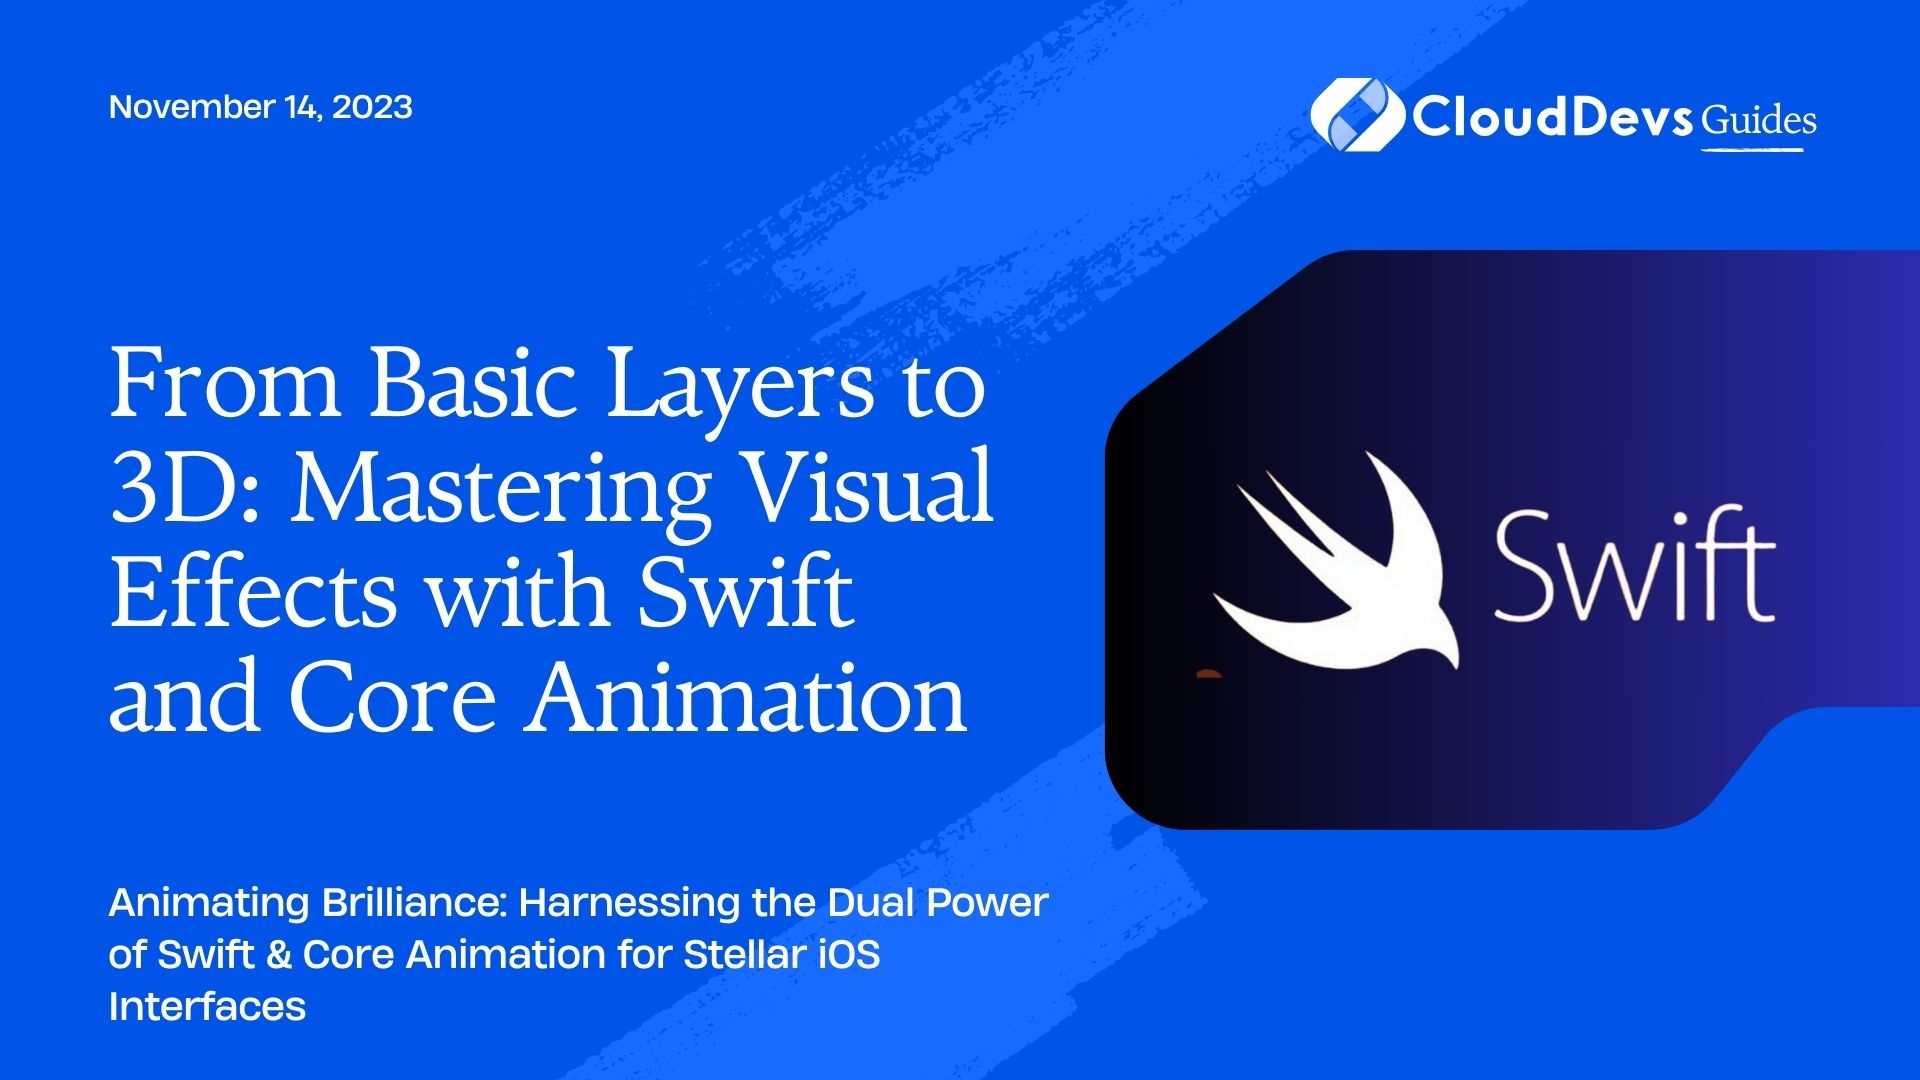 From Basic Layers to 3D: Mastering Visual Effects with Swift and Core Animation